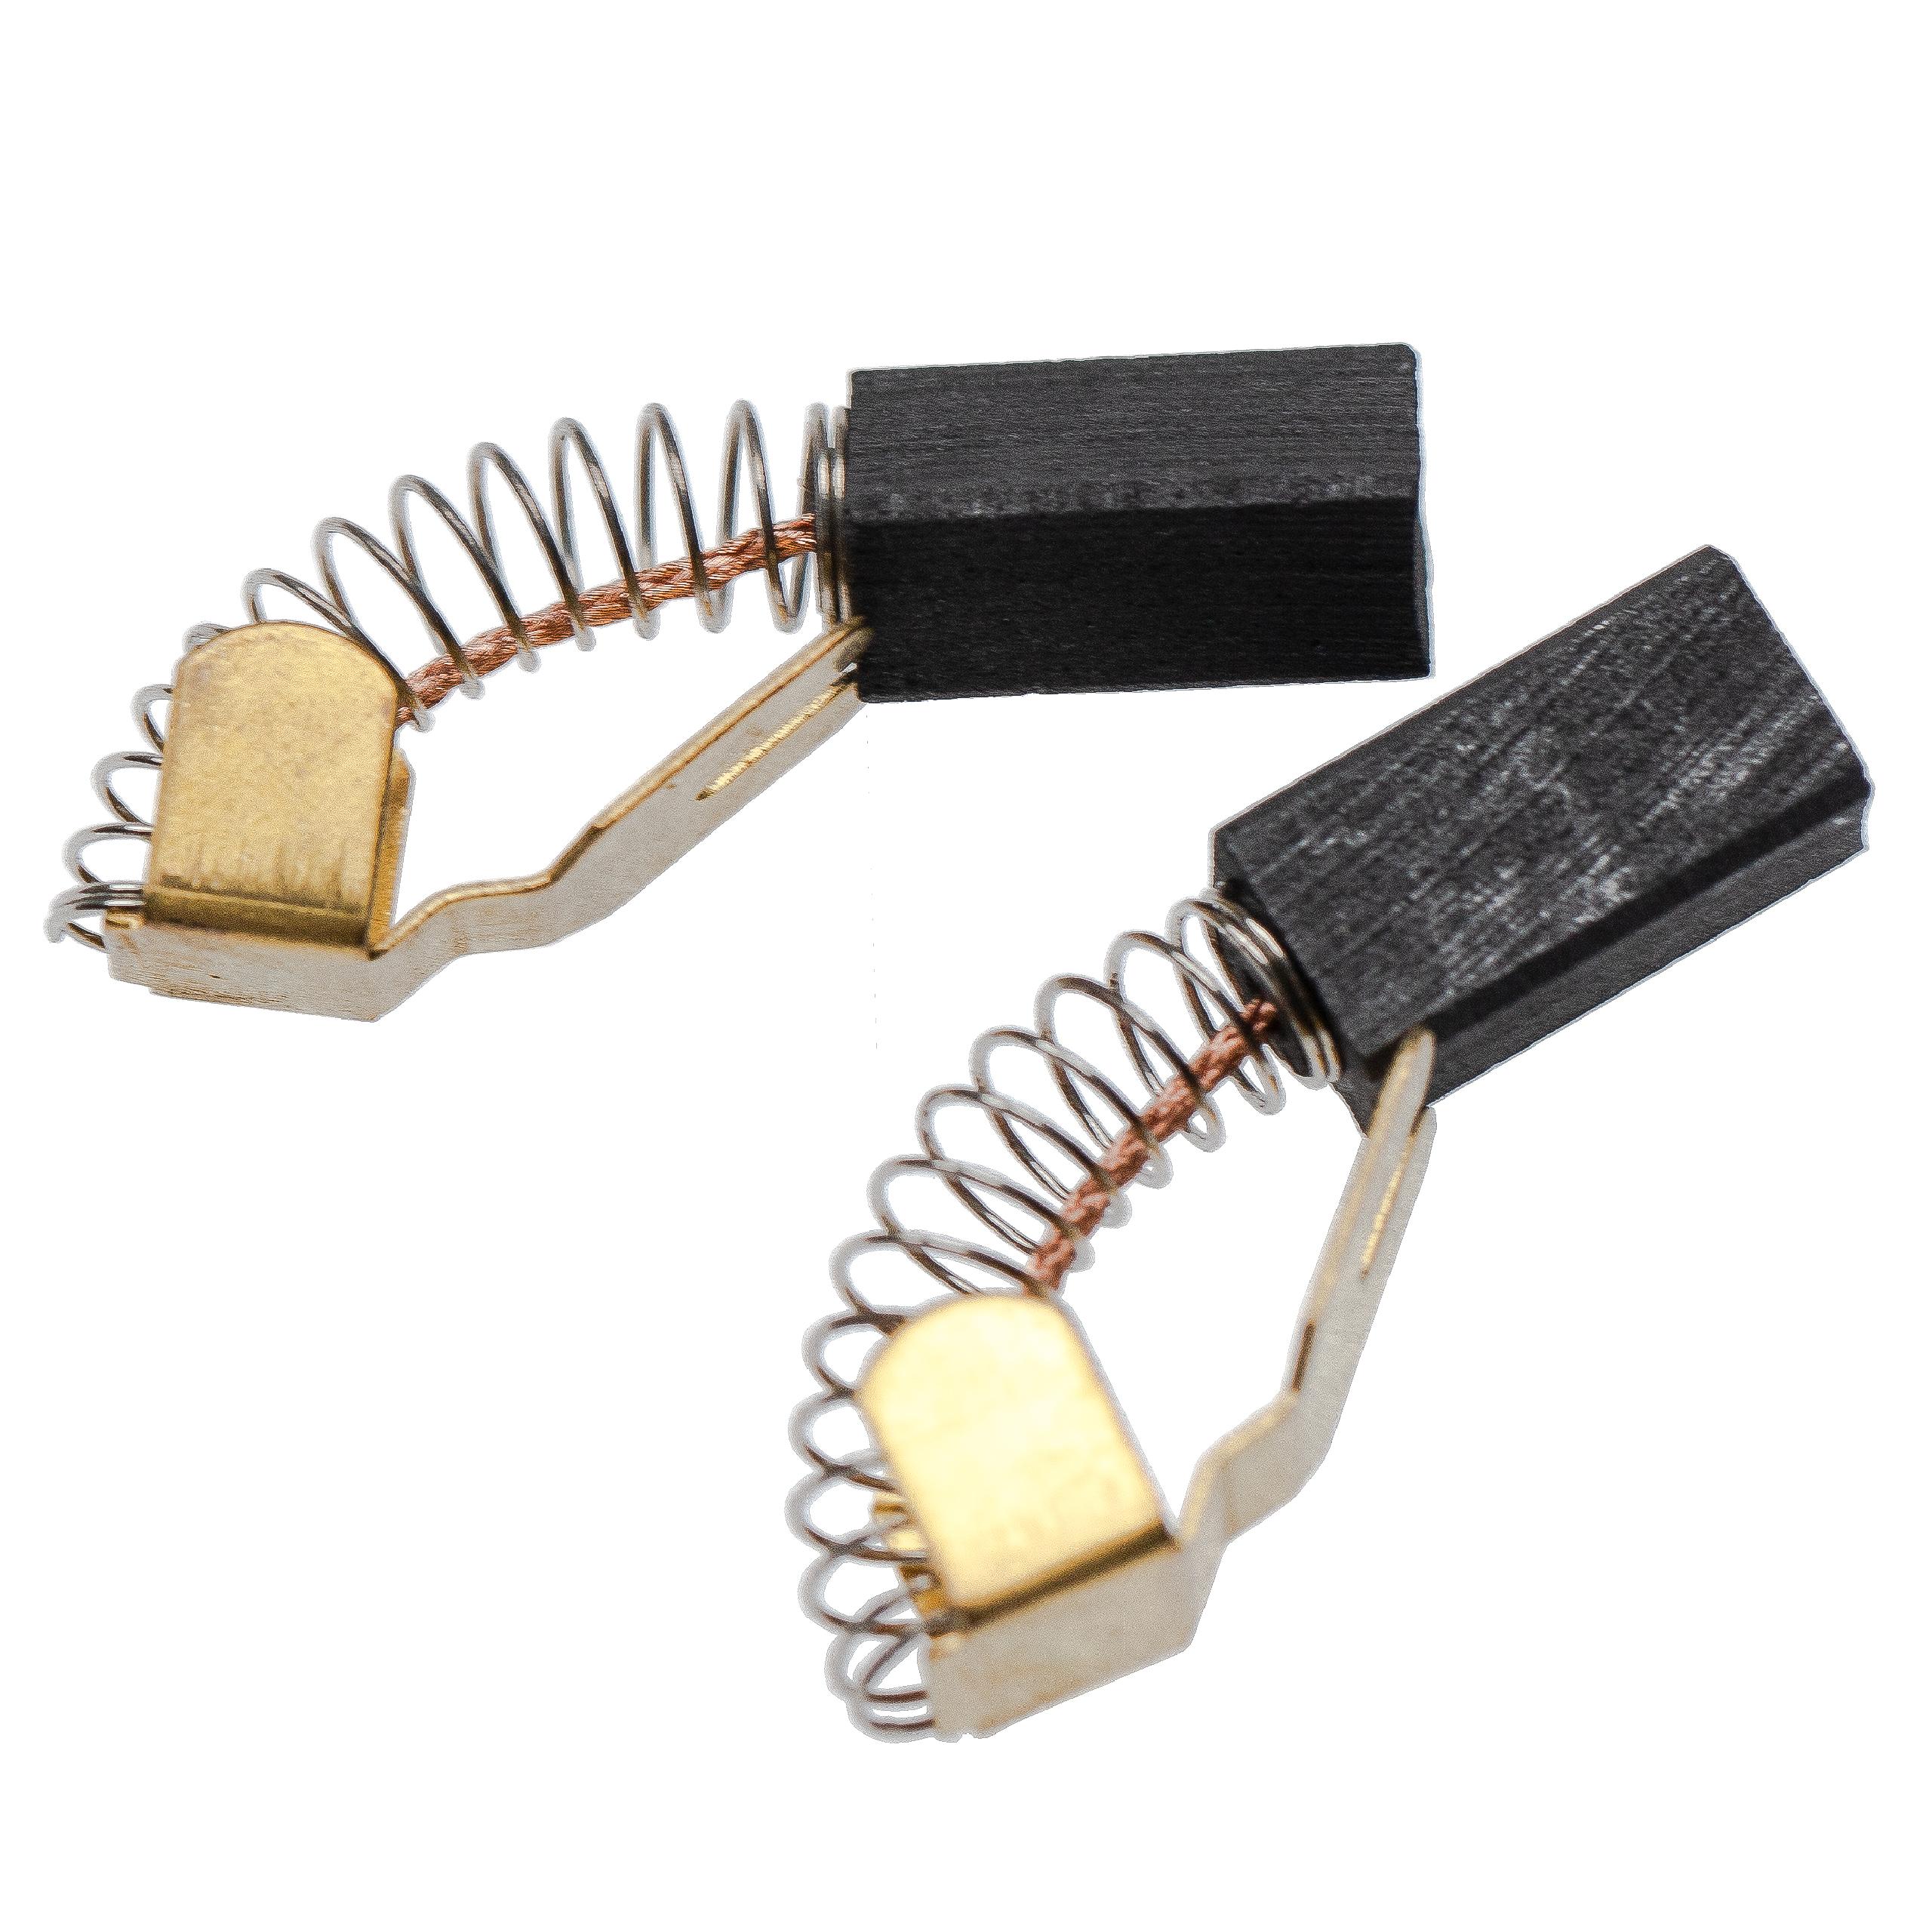 2x Carbon Brush as Replacement for Metabo 316033640, 34301001 Electric Power Tools + Spring, 6.25 x 8 x 16mm